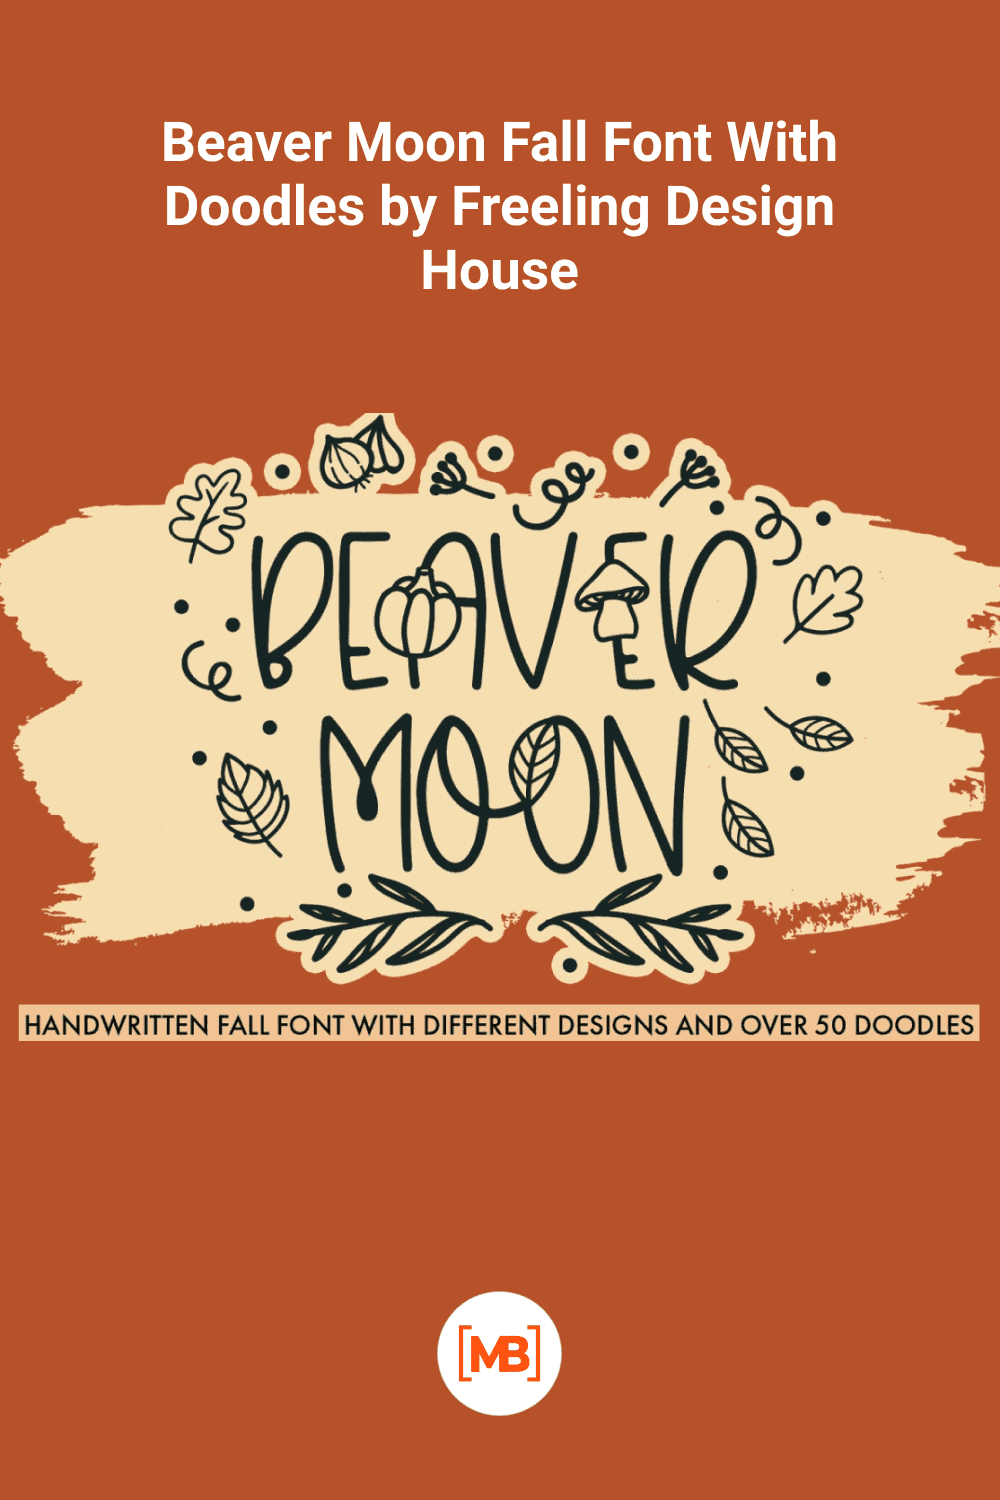 Beaver moon fall font with doodles by Freeling Design House.